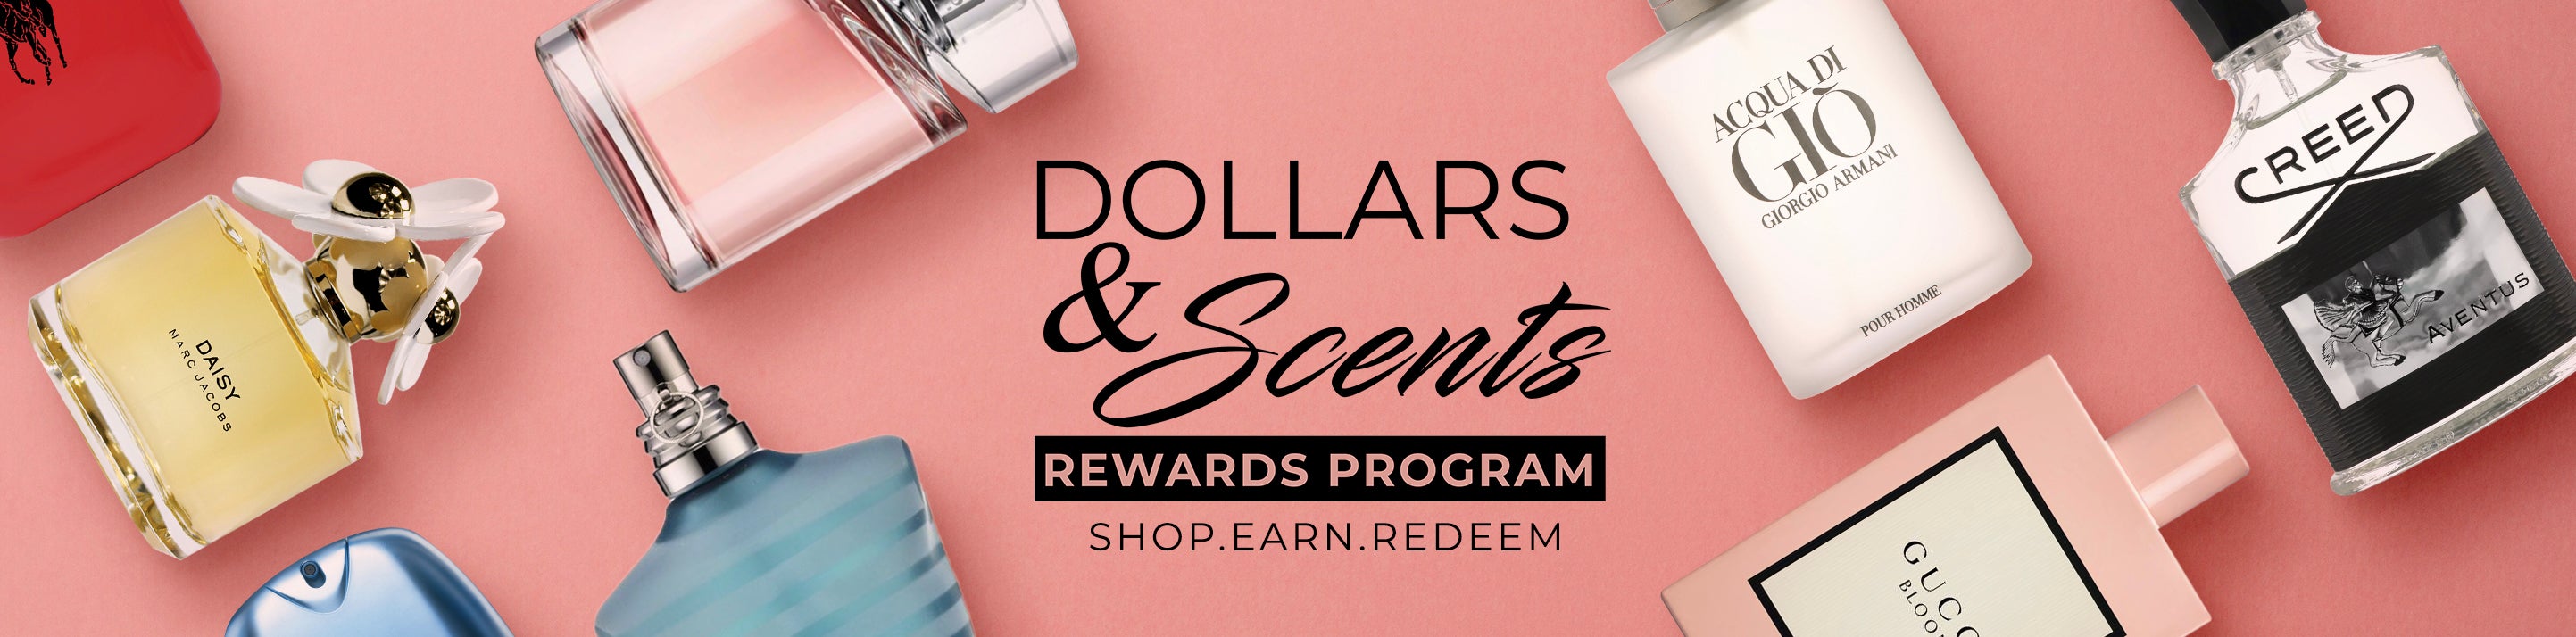 Dollars and Scents, Loyalty Program, Shop, Earn, Redeem